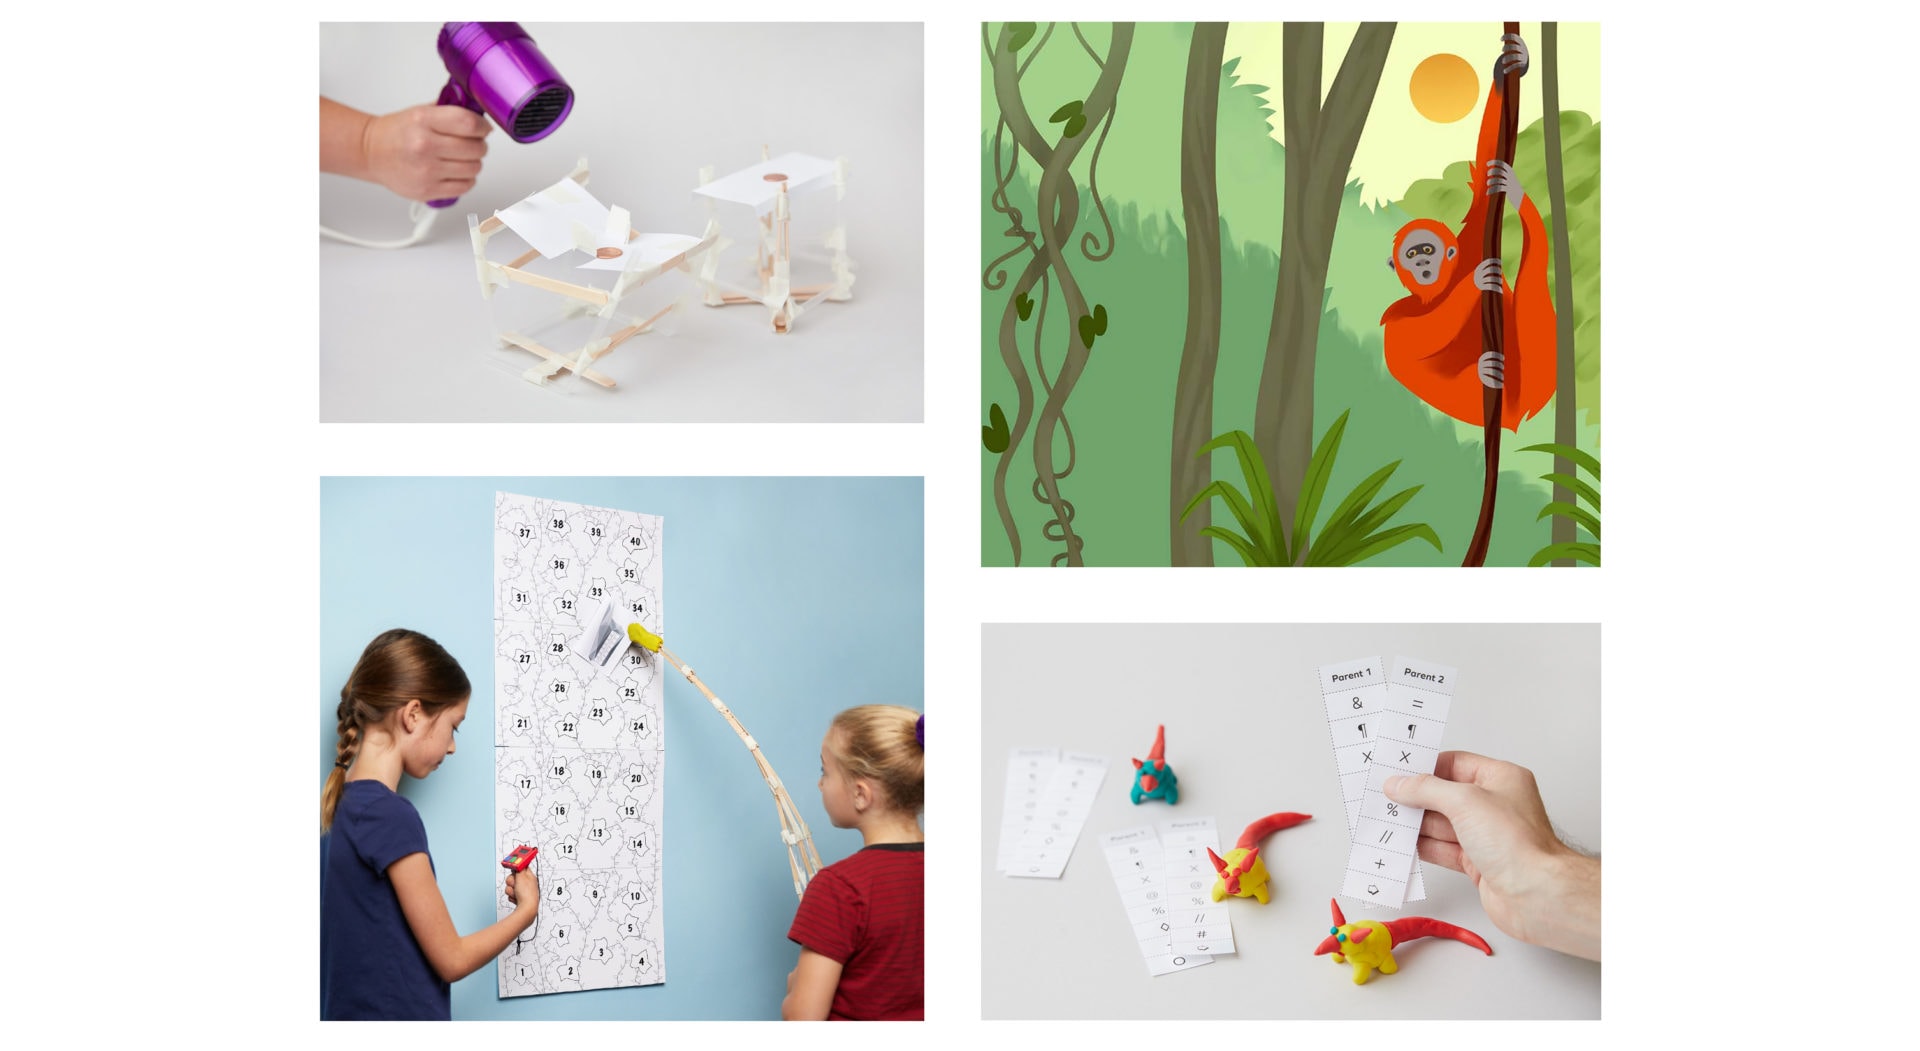 Collage of four images: a person drying a model plane with a hairdryer, an illustration of an orangutan on a vine, two girls playing a wall-mounted game, and hands arranging educational cards with bird figures.